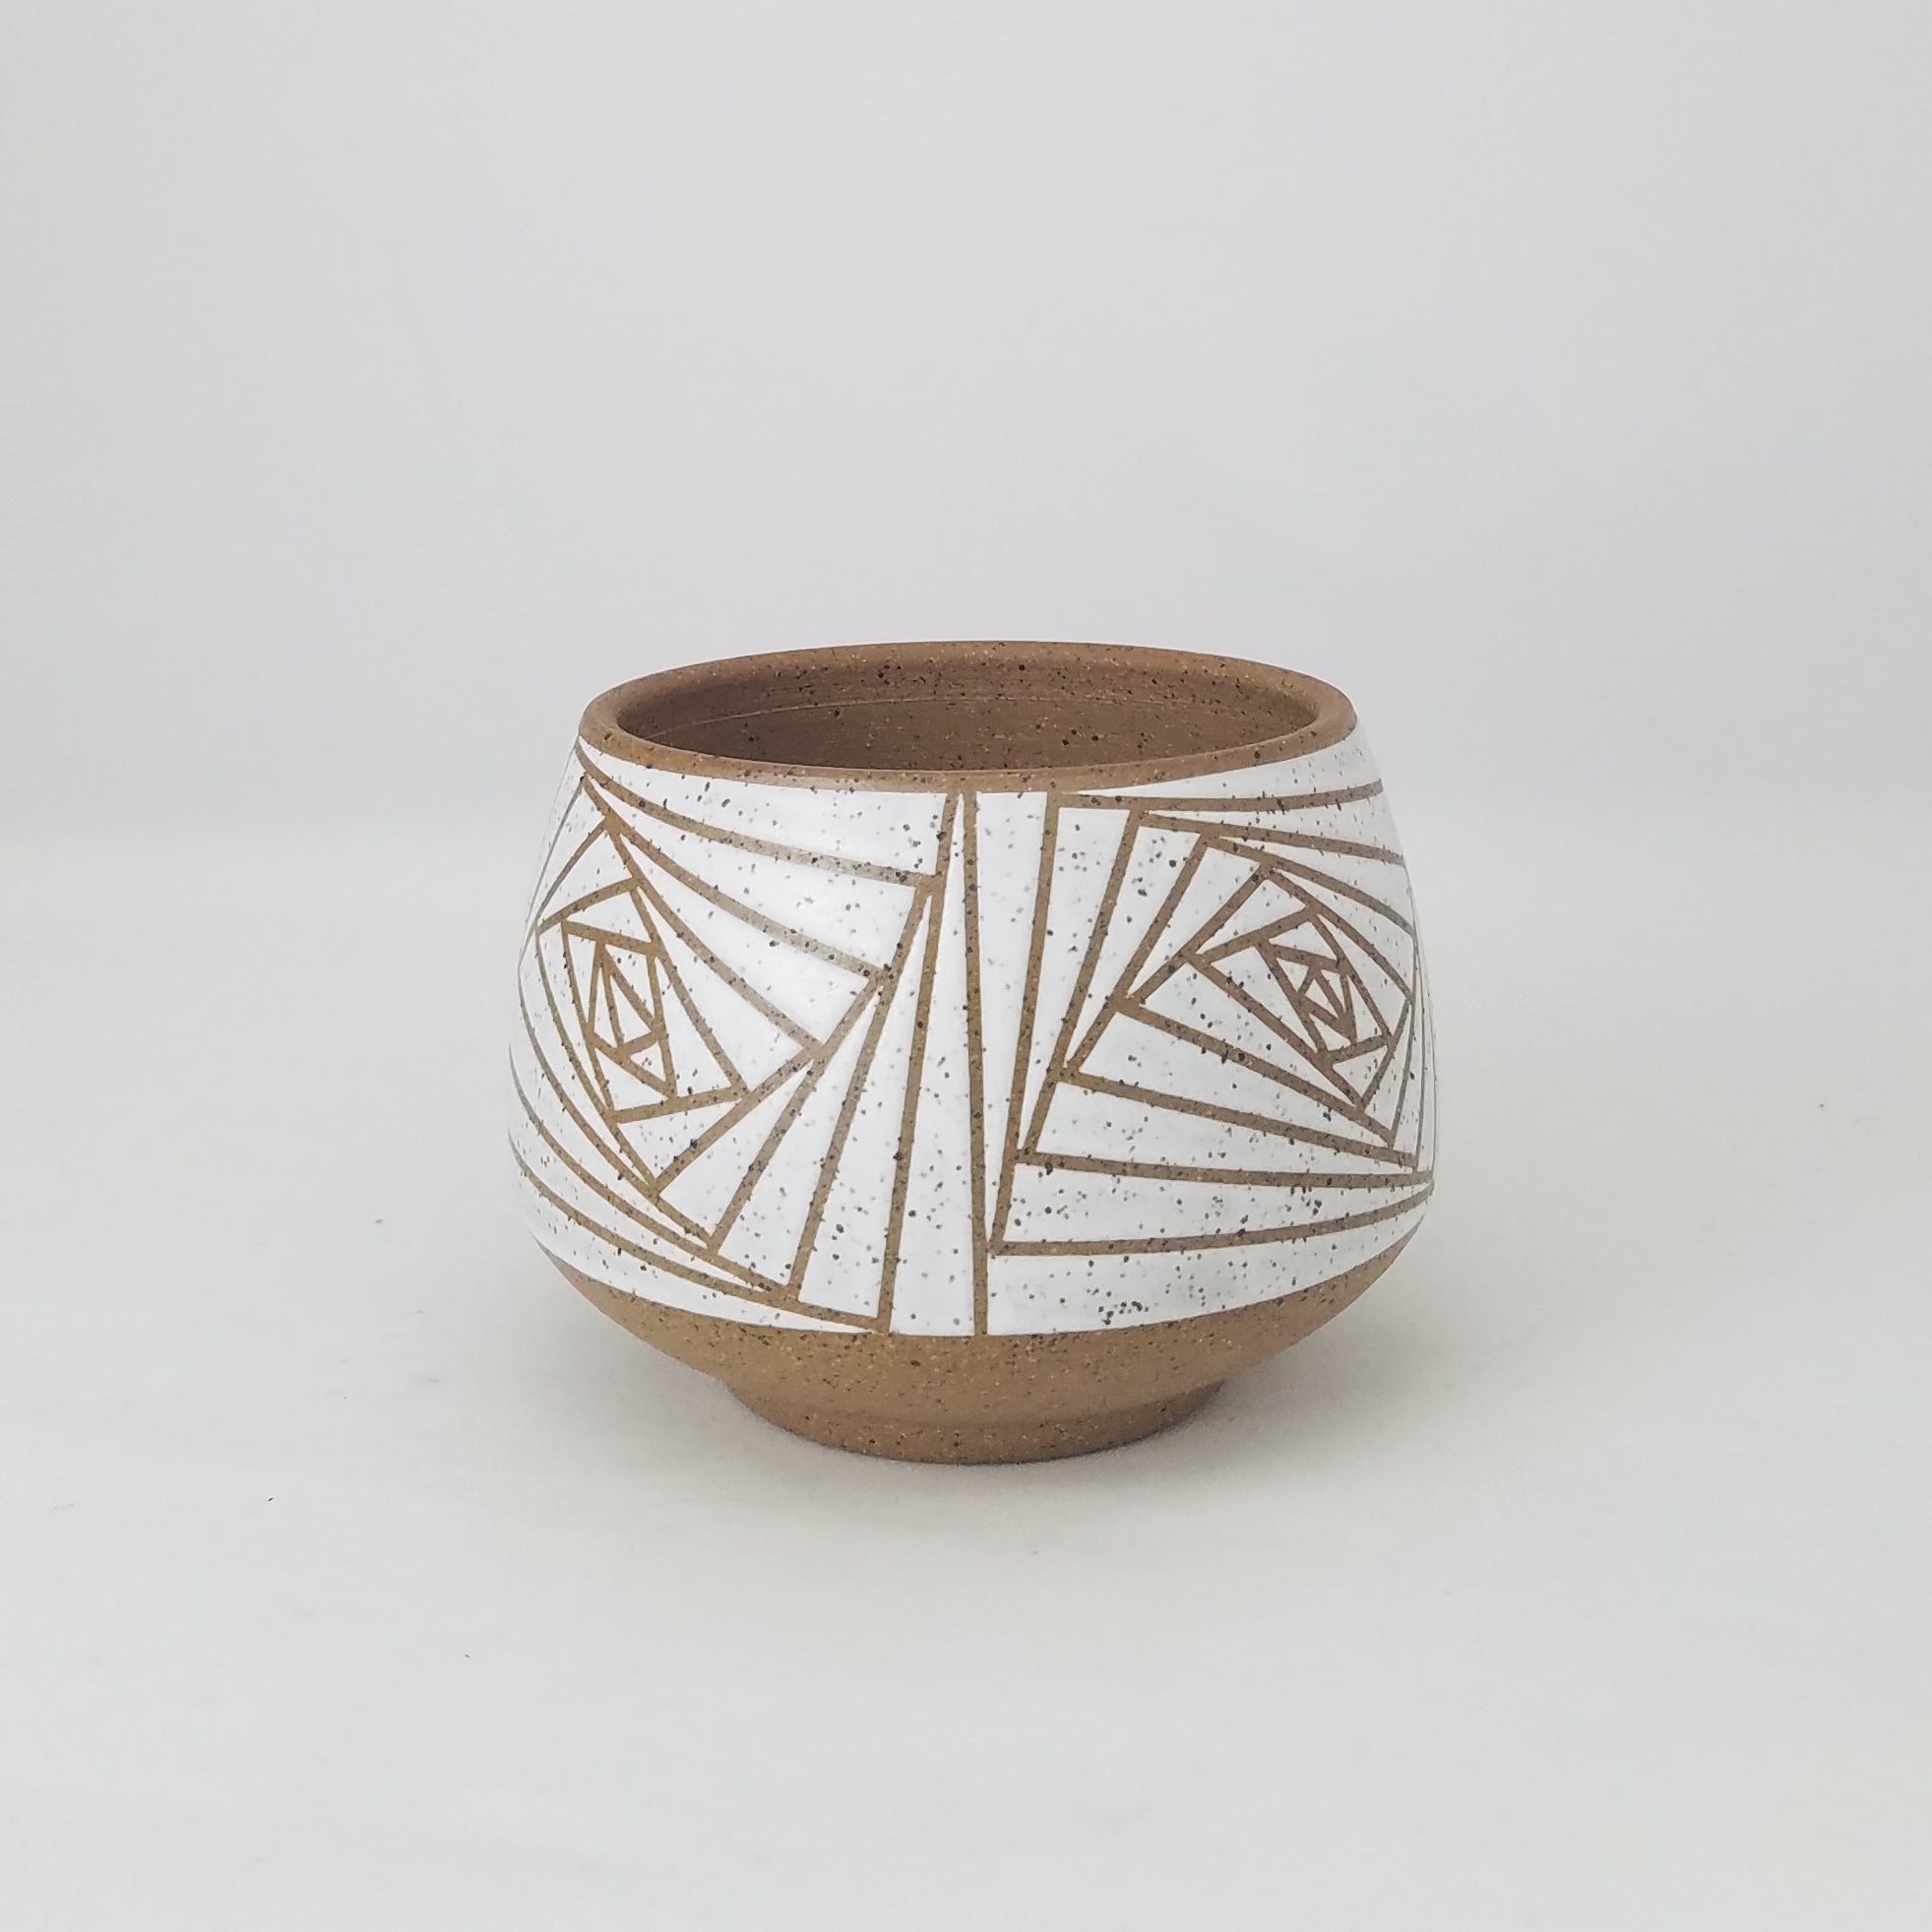 Planter on Speckled Clay (4 in / 10 cm wide)